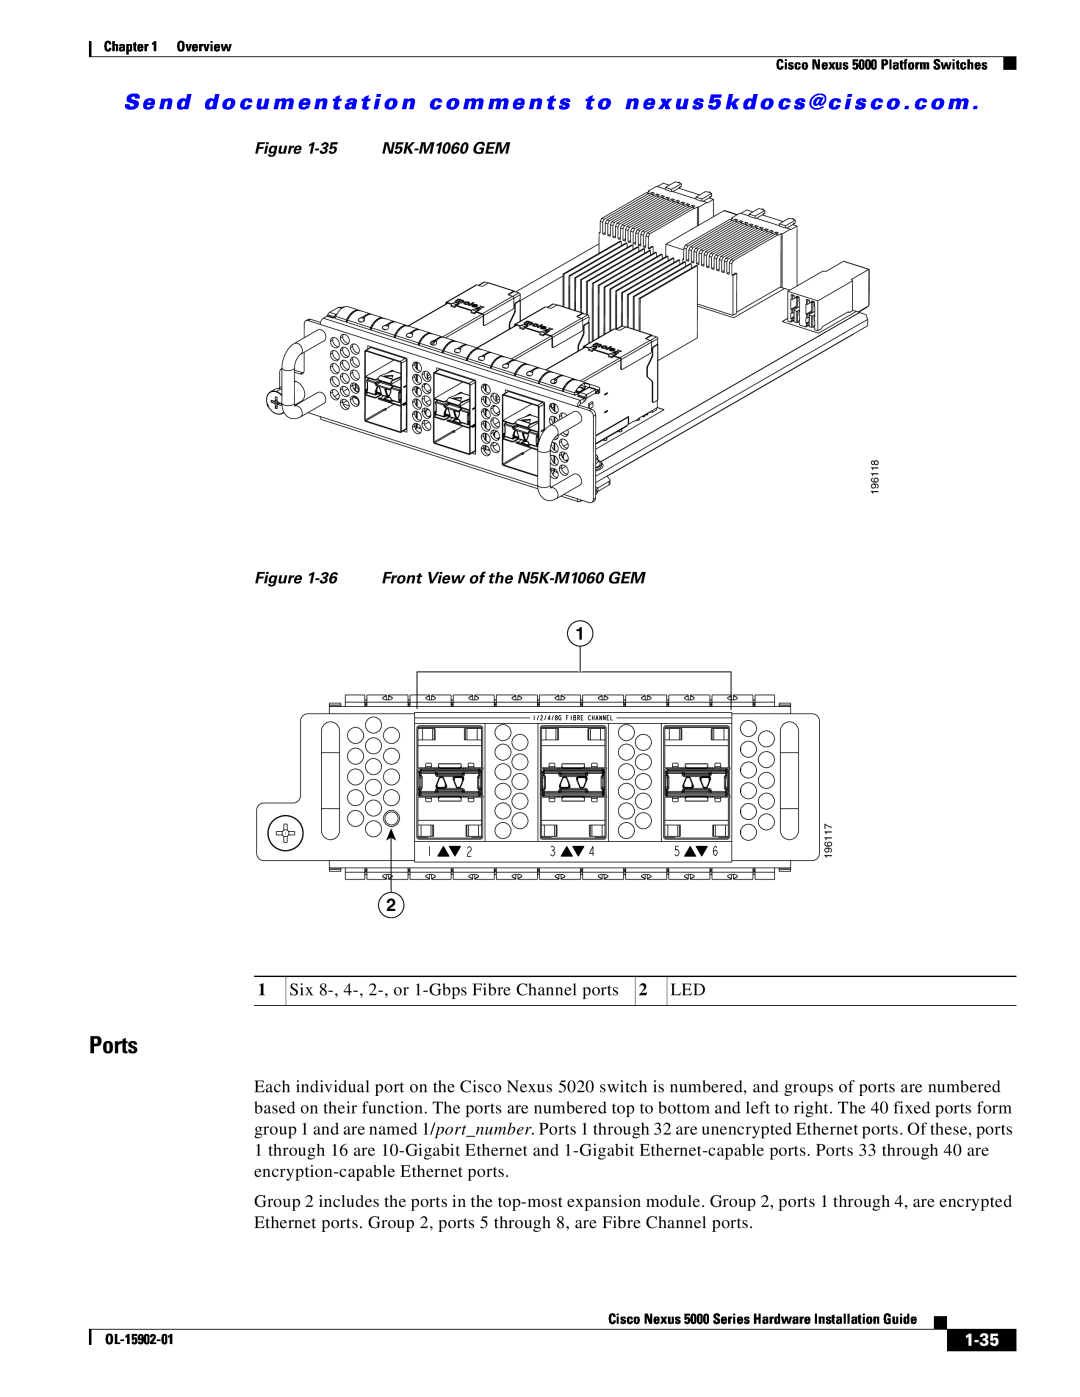 Cisco Systems 5000 manual Ports, 1-35, 35 N5K-M1060 GEM, 36 Front View of the N5K-M1060 GEM, 1/2/4/8G FIBRE CHANNEL 